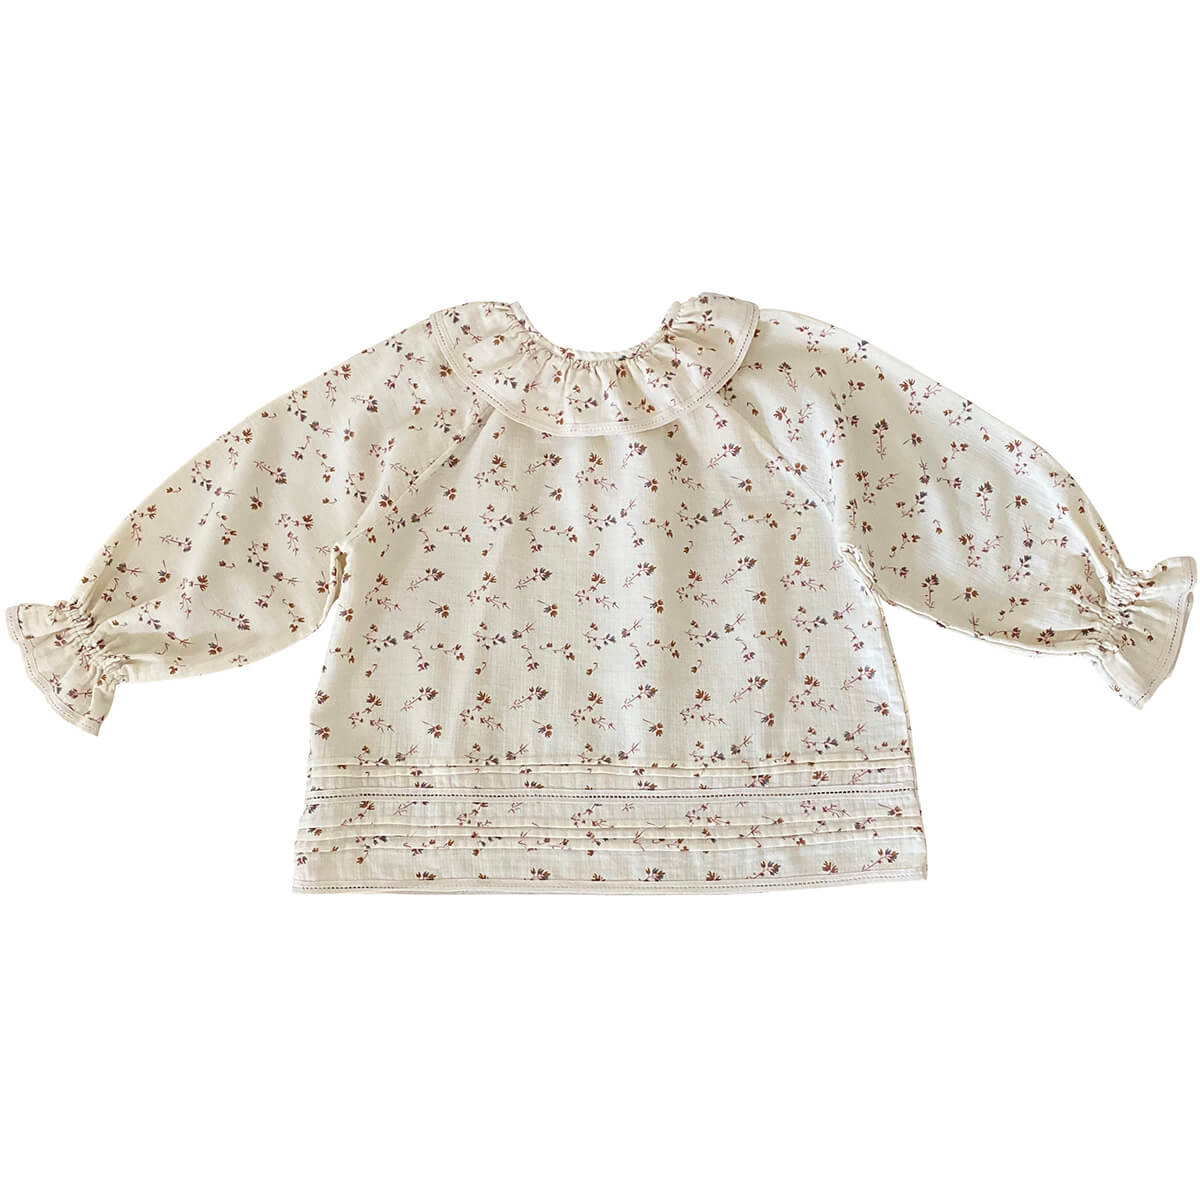 Bogdana Blouse in Floral by Liilu - Last One In Stock - 12 Years ...